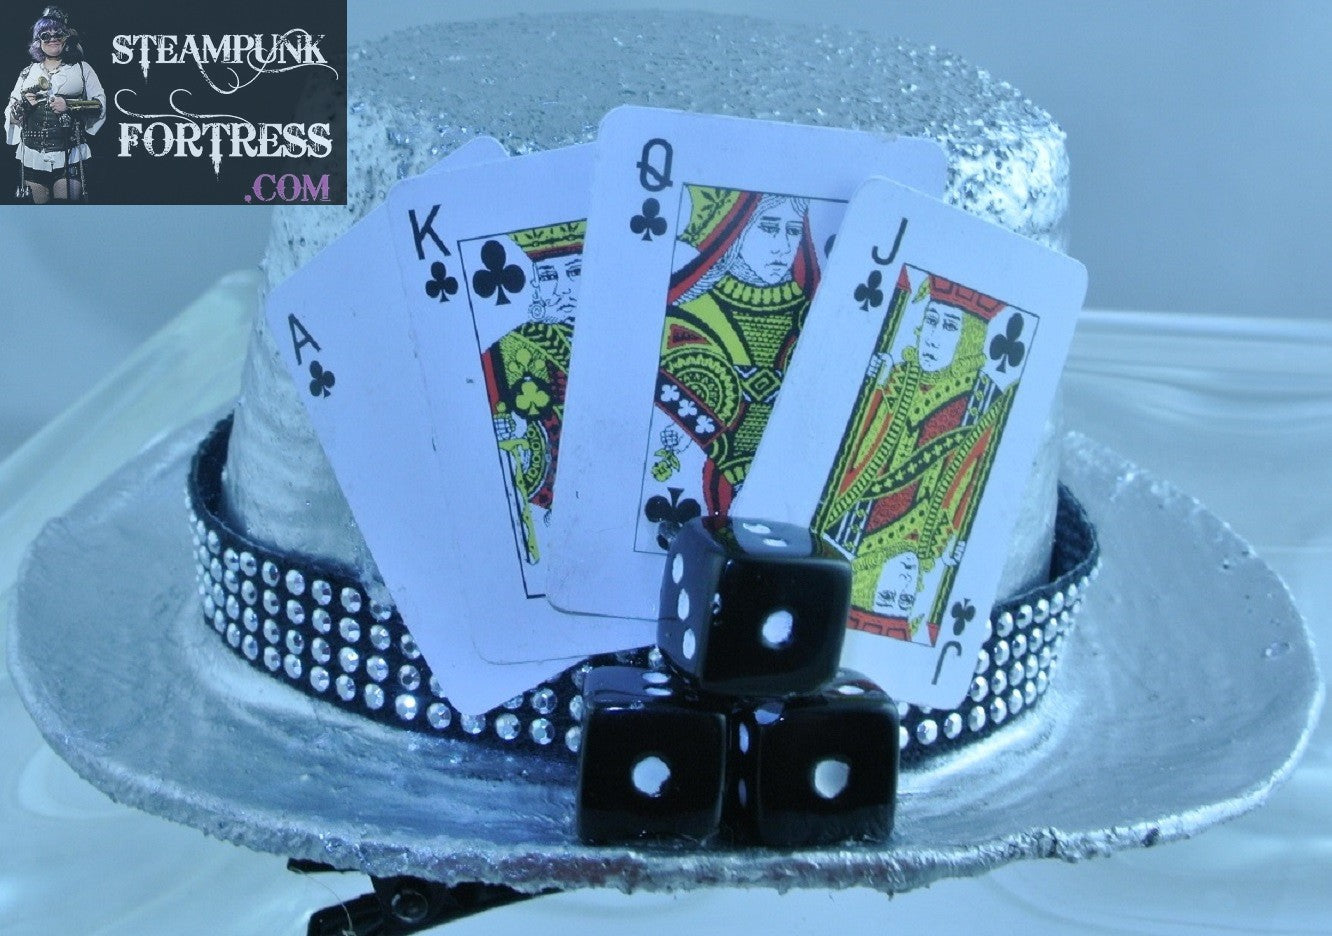 SILVER PLAYING CARDS 4 KING QUEEN JACK ACE BLACK CLUBS 3 BLACK DICE BLACK 4 ROW SILVER STUDDED RIBBON BAND XS EXTRA SMALL MINI TOP HAT ALICE IN WONDERLAND COSPLAY COSTUME HALLOWEEN POKER  STARR WILDE STEAMPUNK FORTRESS